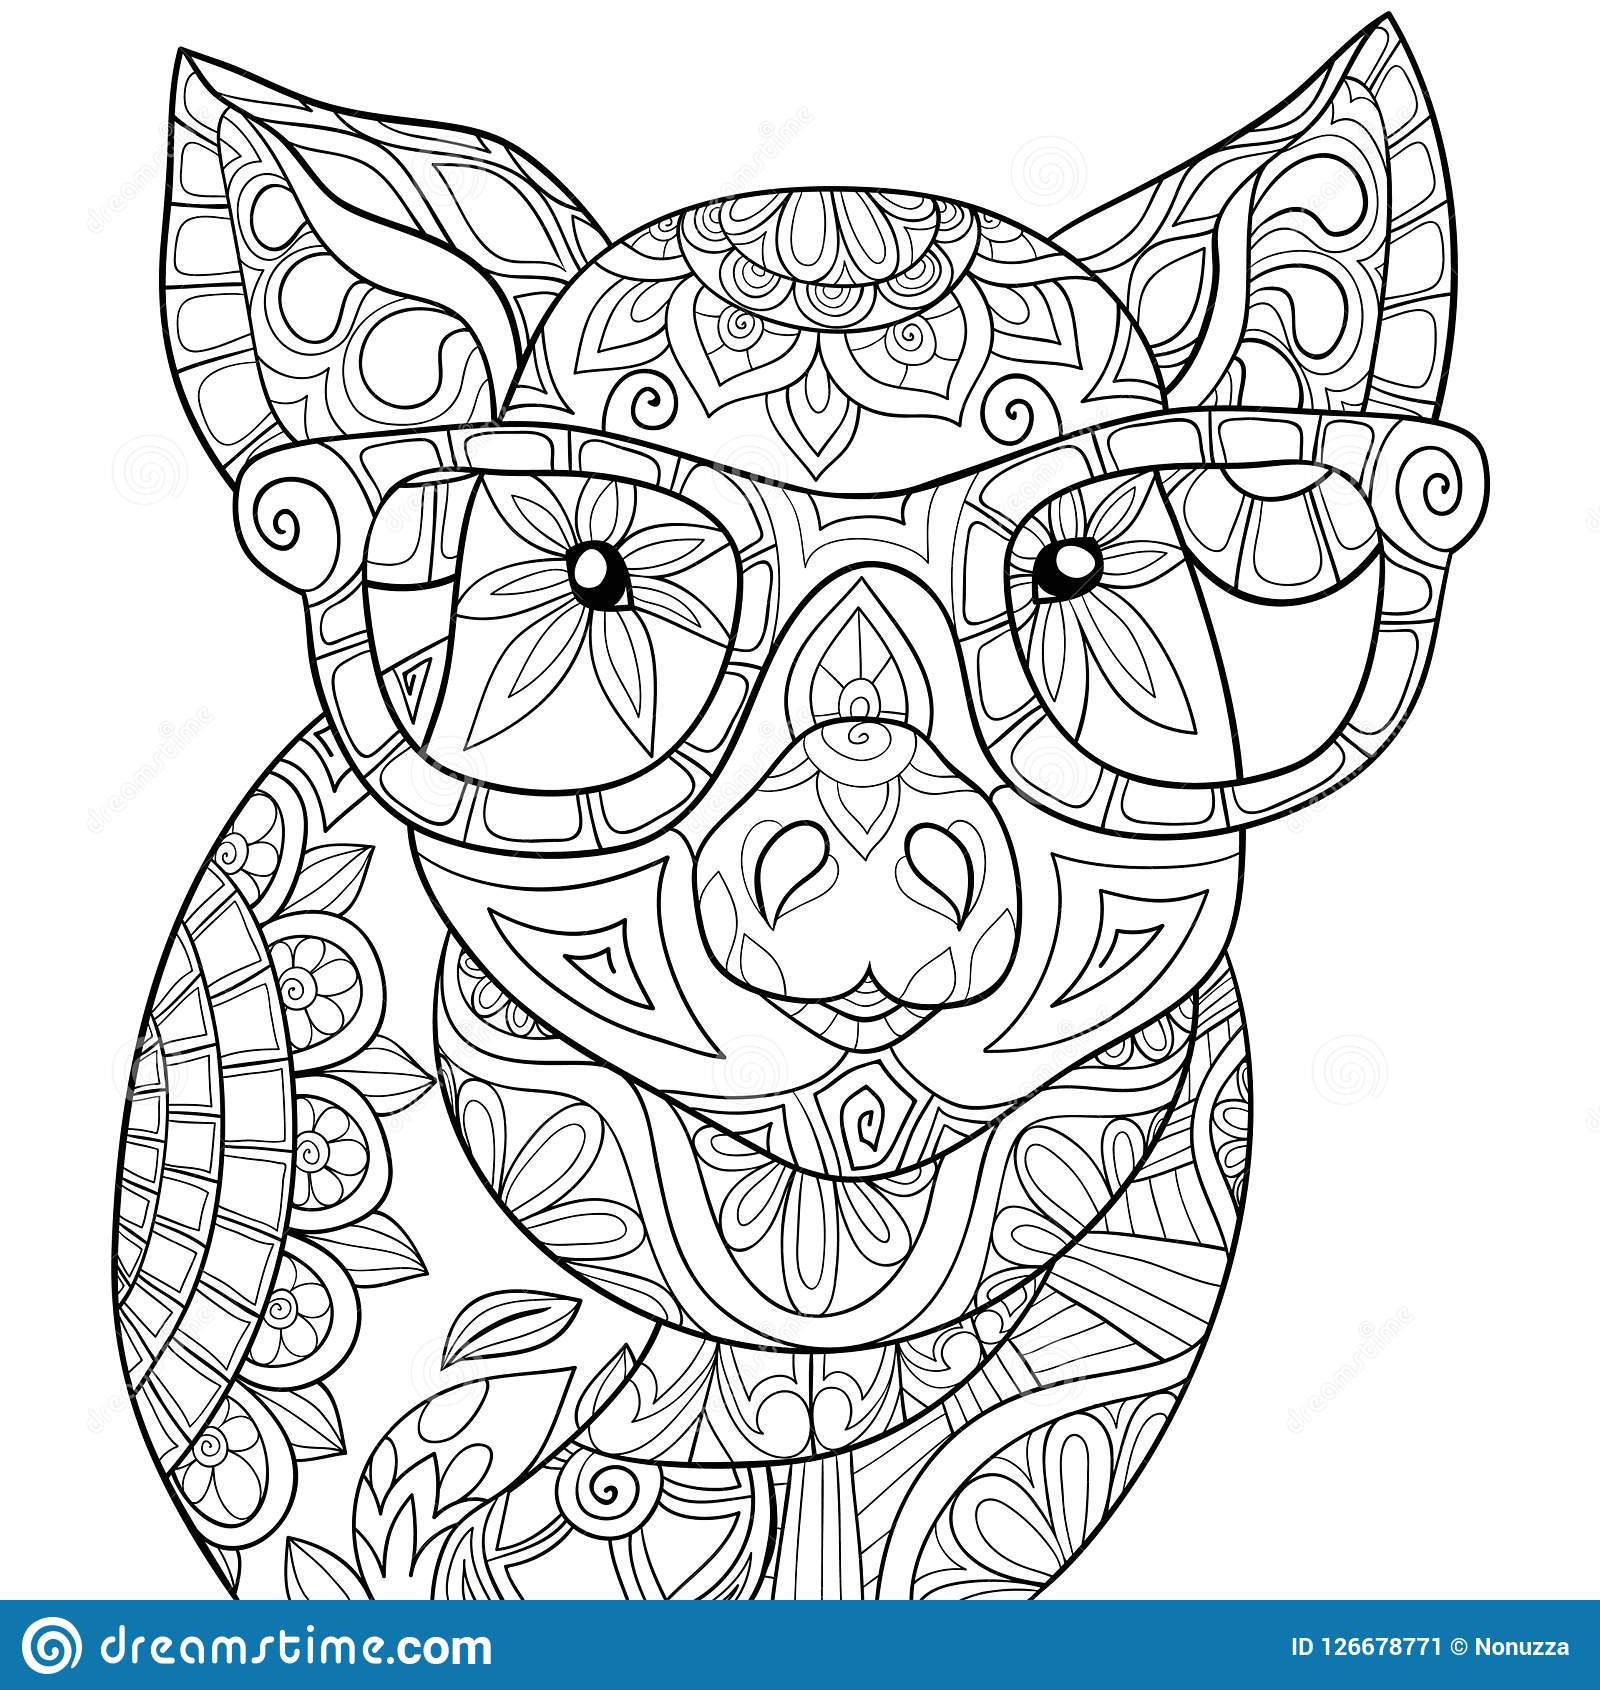 Pig Coloring Pages For Adults
 Adult Coloring Book page A Cute Pig Image For Relaxing Zen